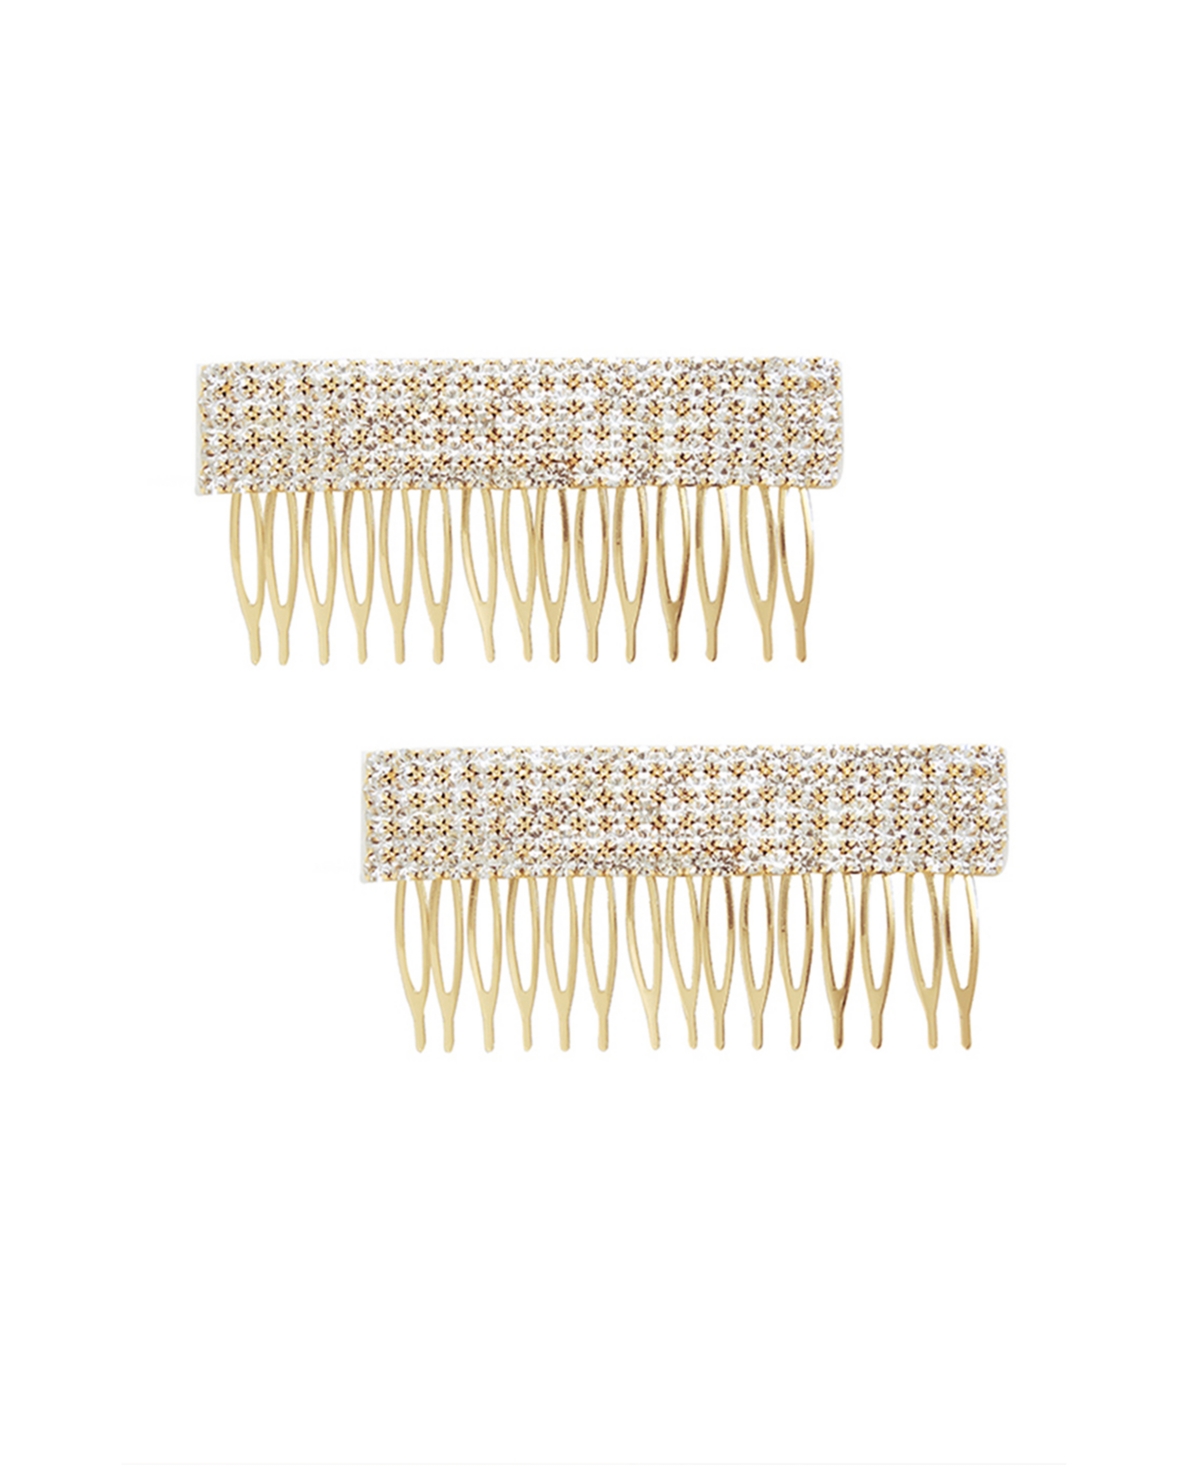 Dynasty Hair Comb Set in Clear - Gold